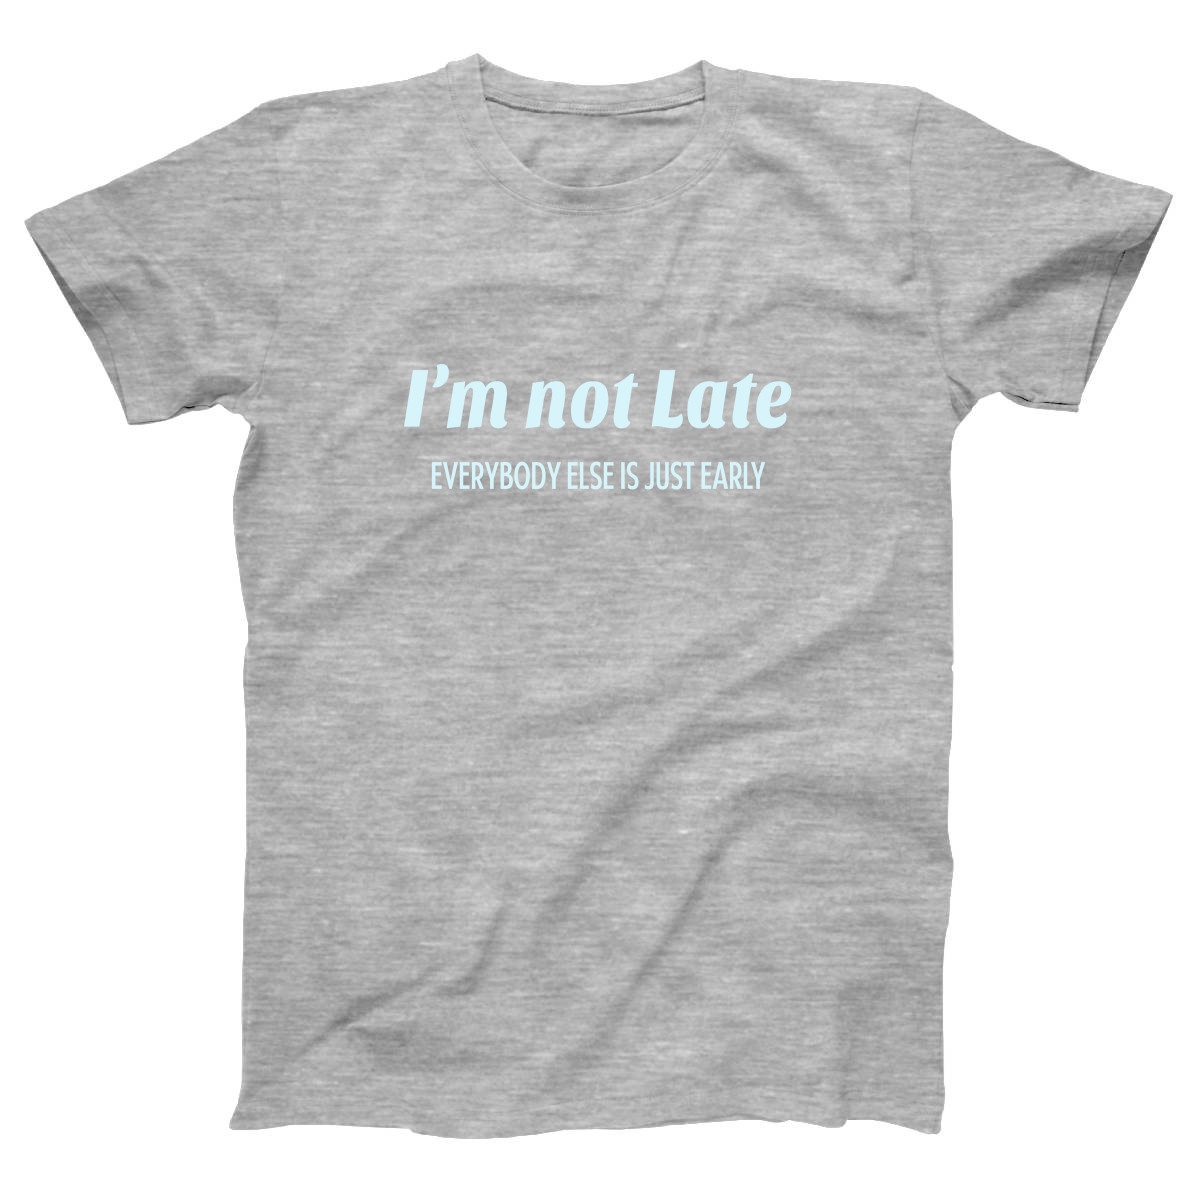 I’m not late everybody else is just early Women's T-shirt | Gray